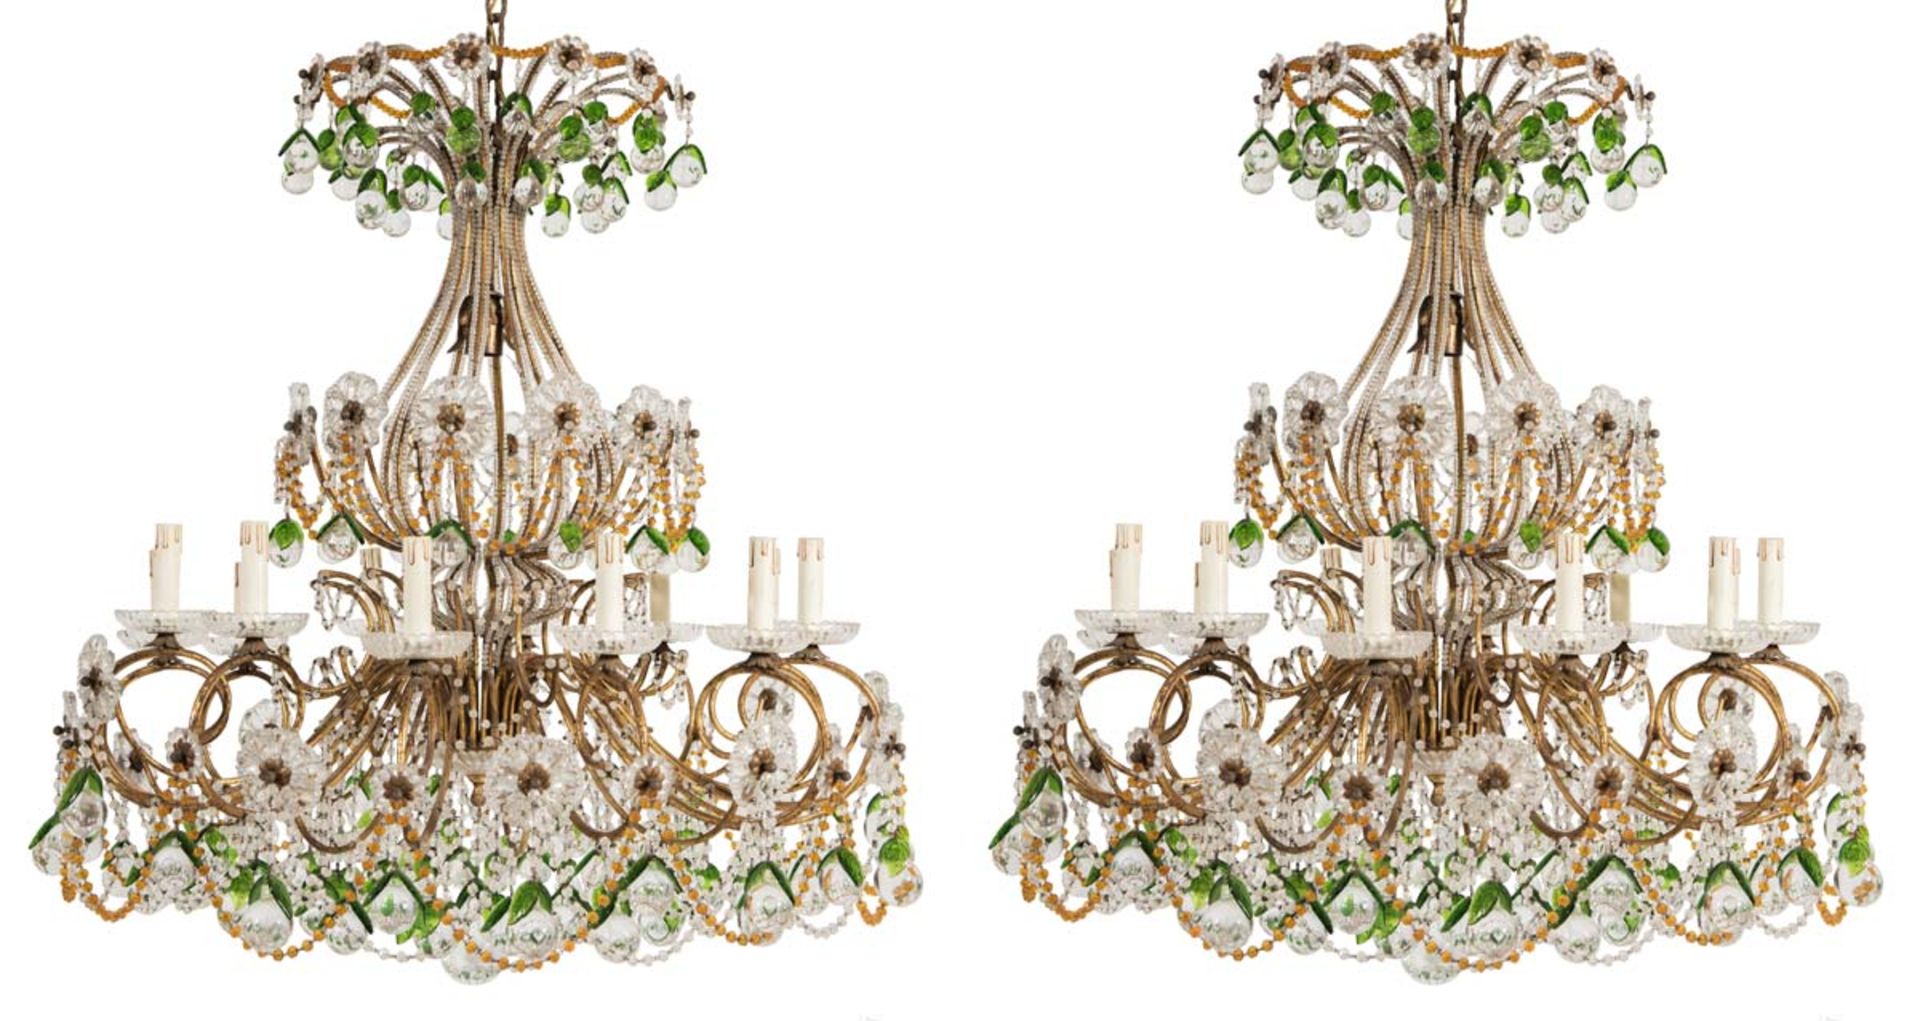 Pair of thirteen-light chandeliers, attributed to Maison Baguès, 20th Century.